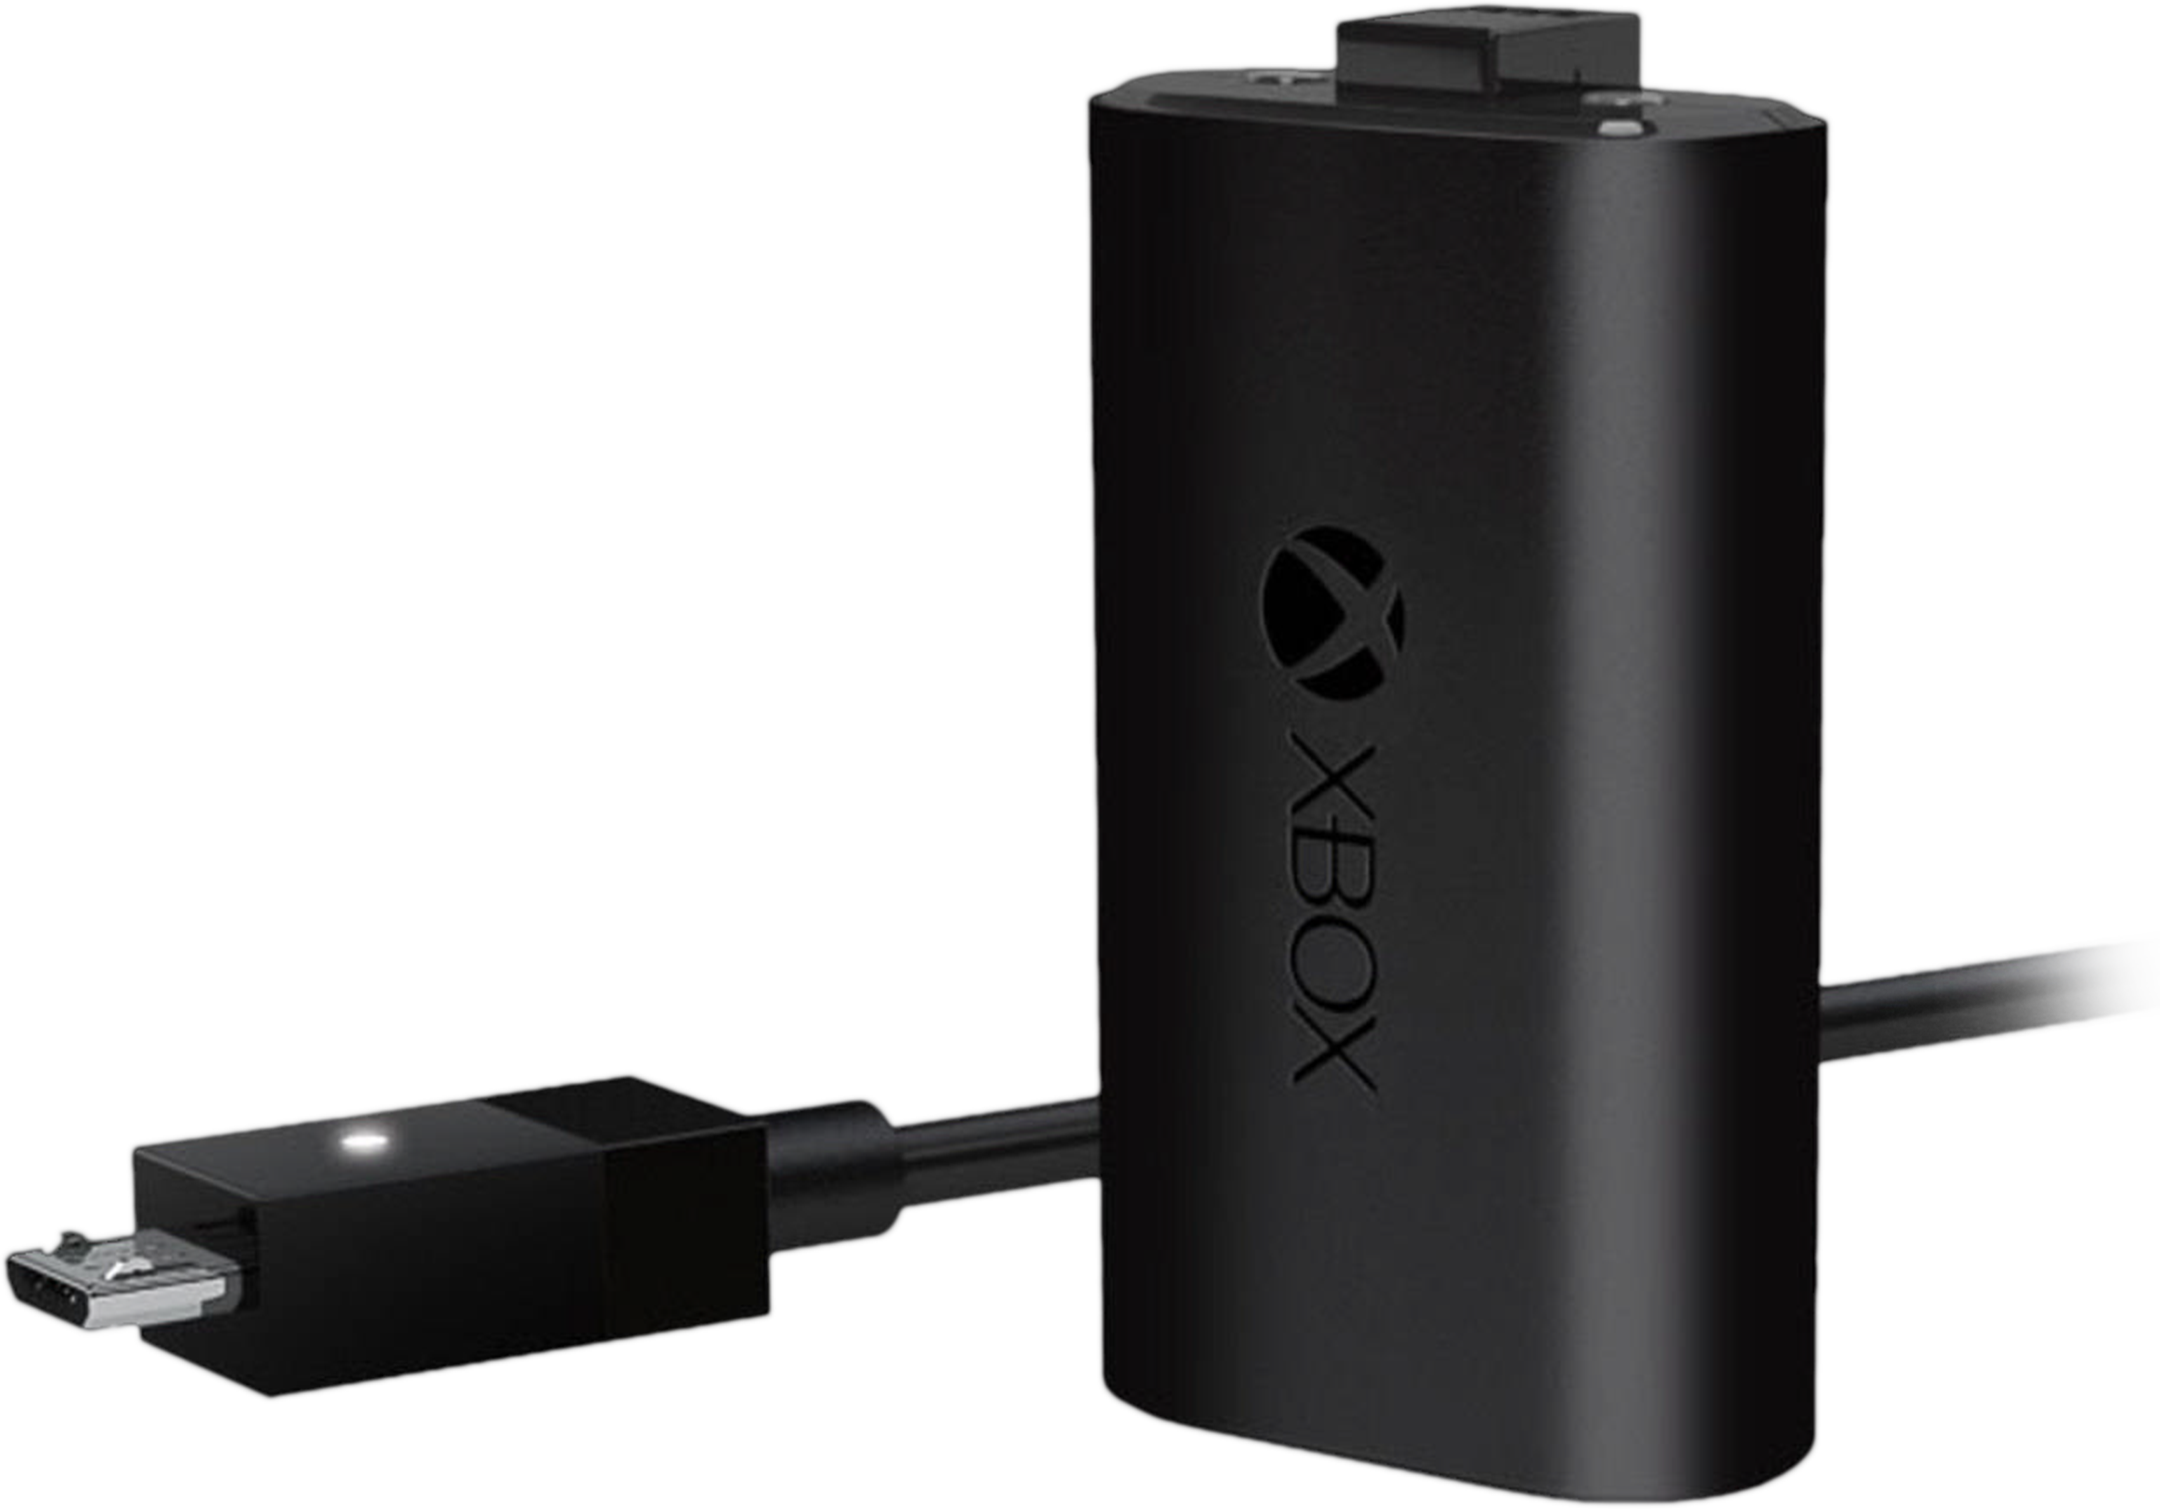 xbox one x play and charge kit